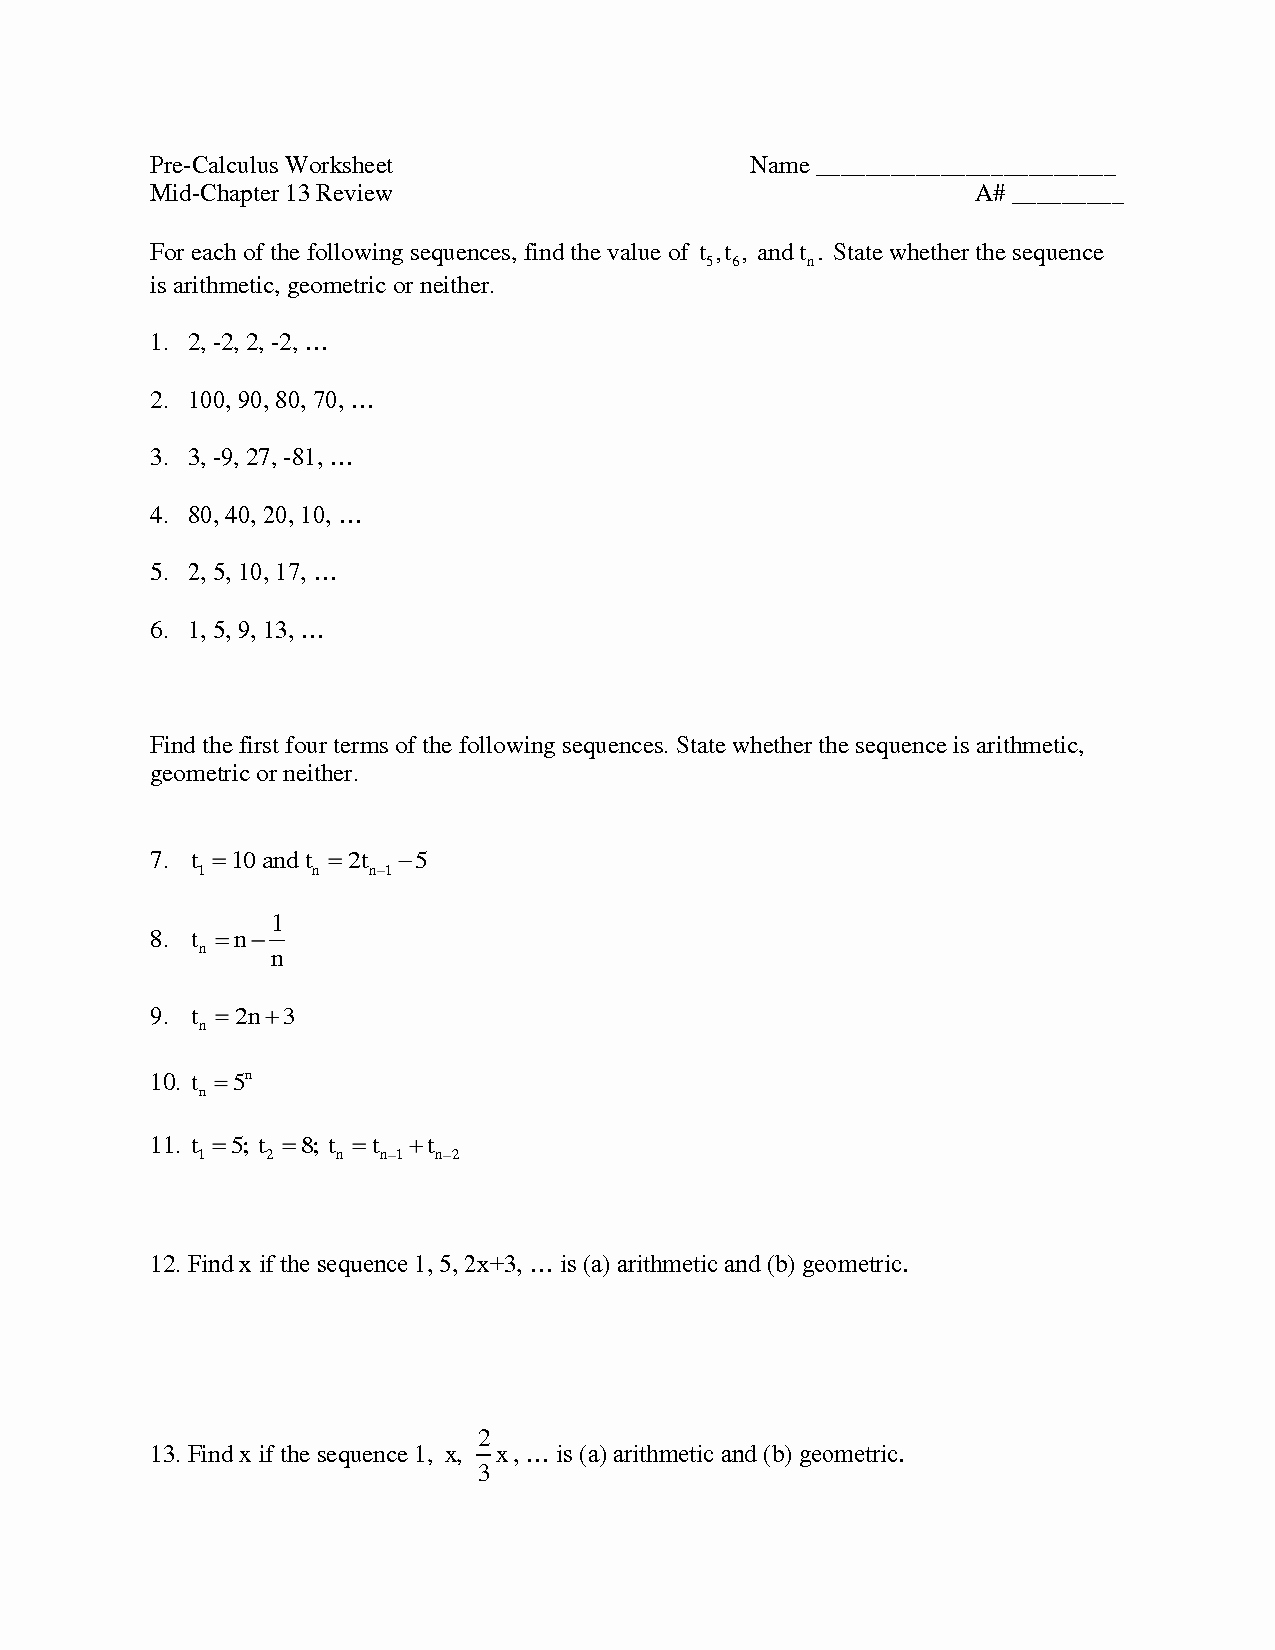 Geometric and Arithmetic Sequences Worksheet Fresh 51 Arithmetic Sequences and Series Worksheet Geometric